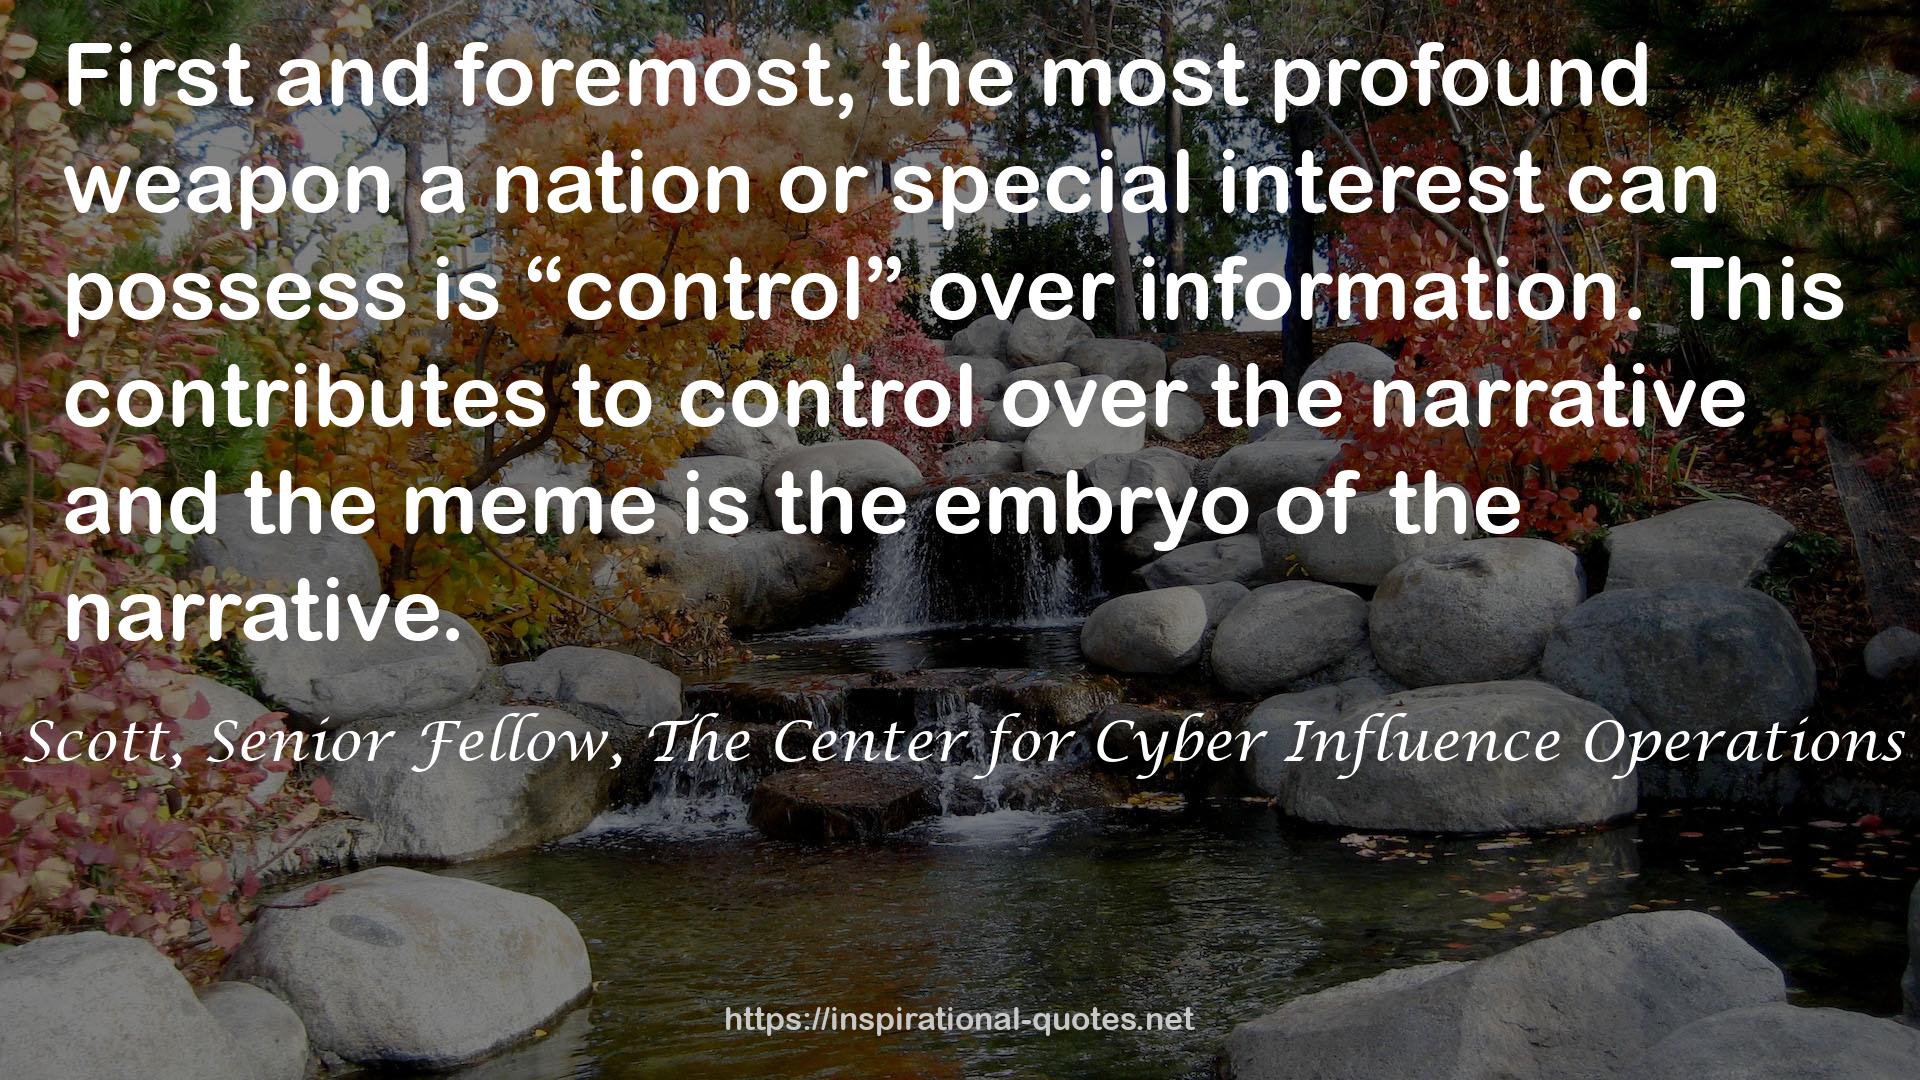 James Scott, Senior Fellow, The Center for Cyber Influence Operations Studies QUOTES